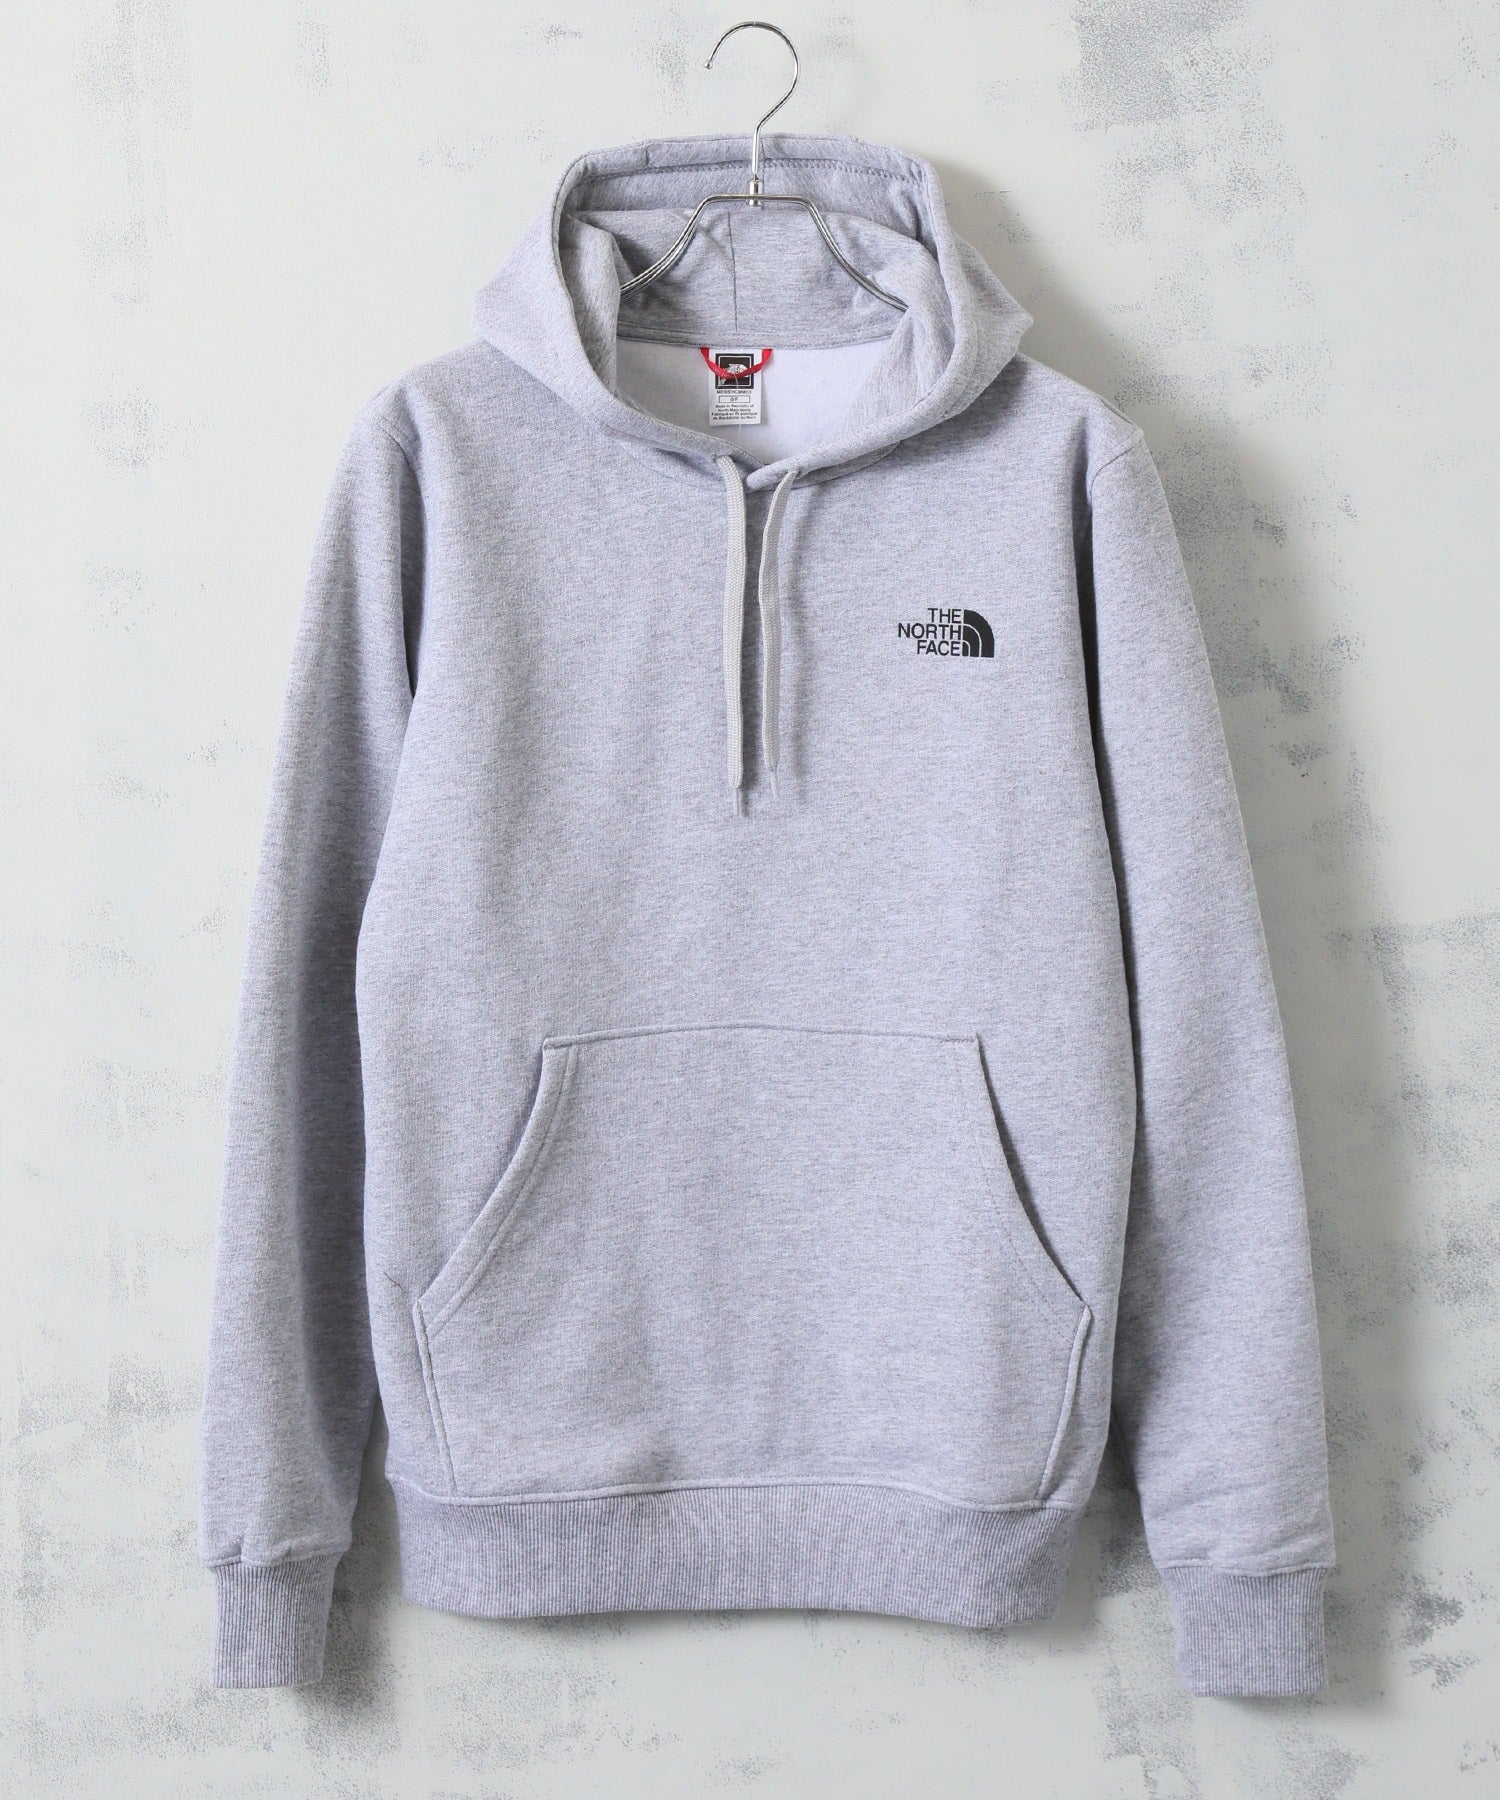 THE NORTH FACE/ザノースフェイス】Simple Dome Hoodie/シンプル